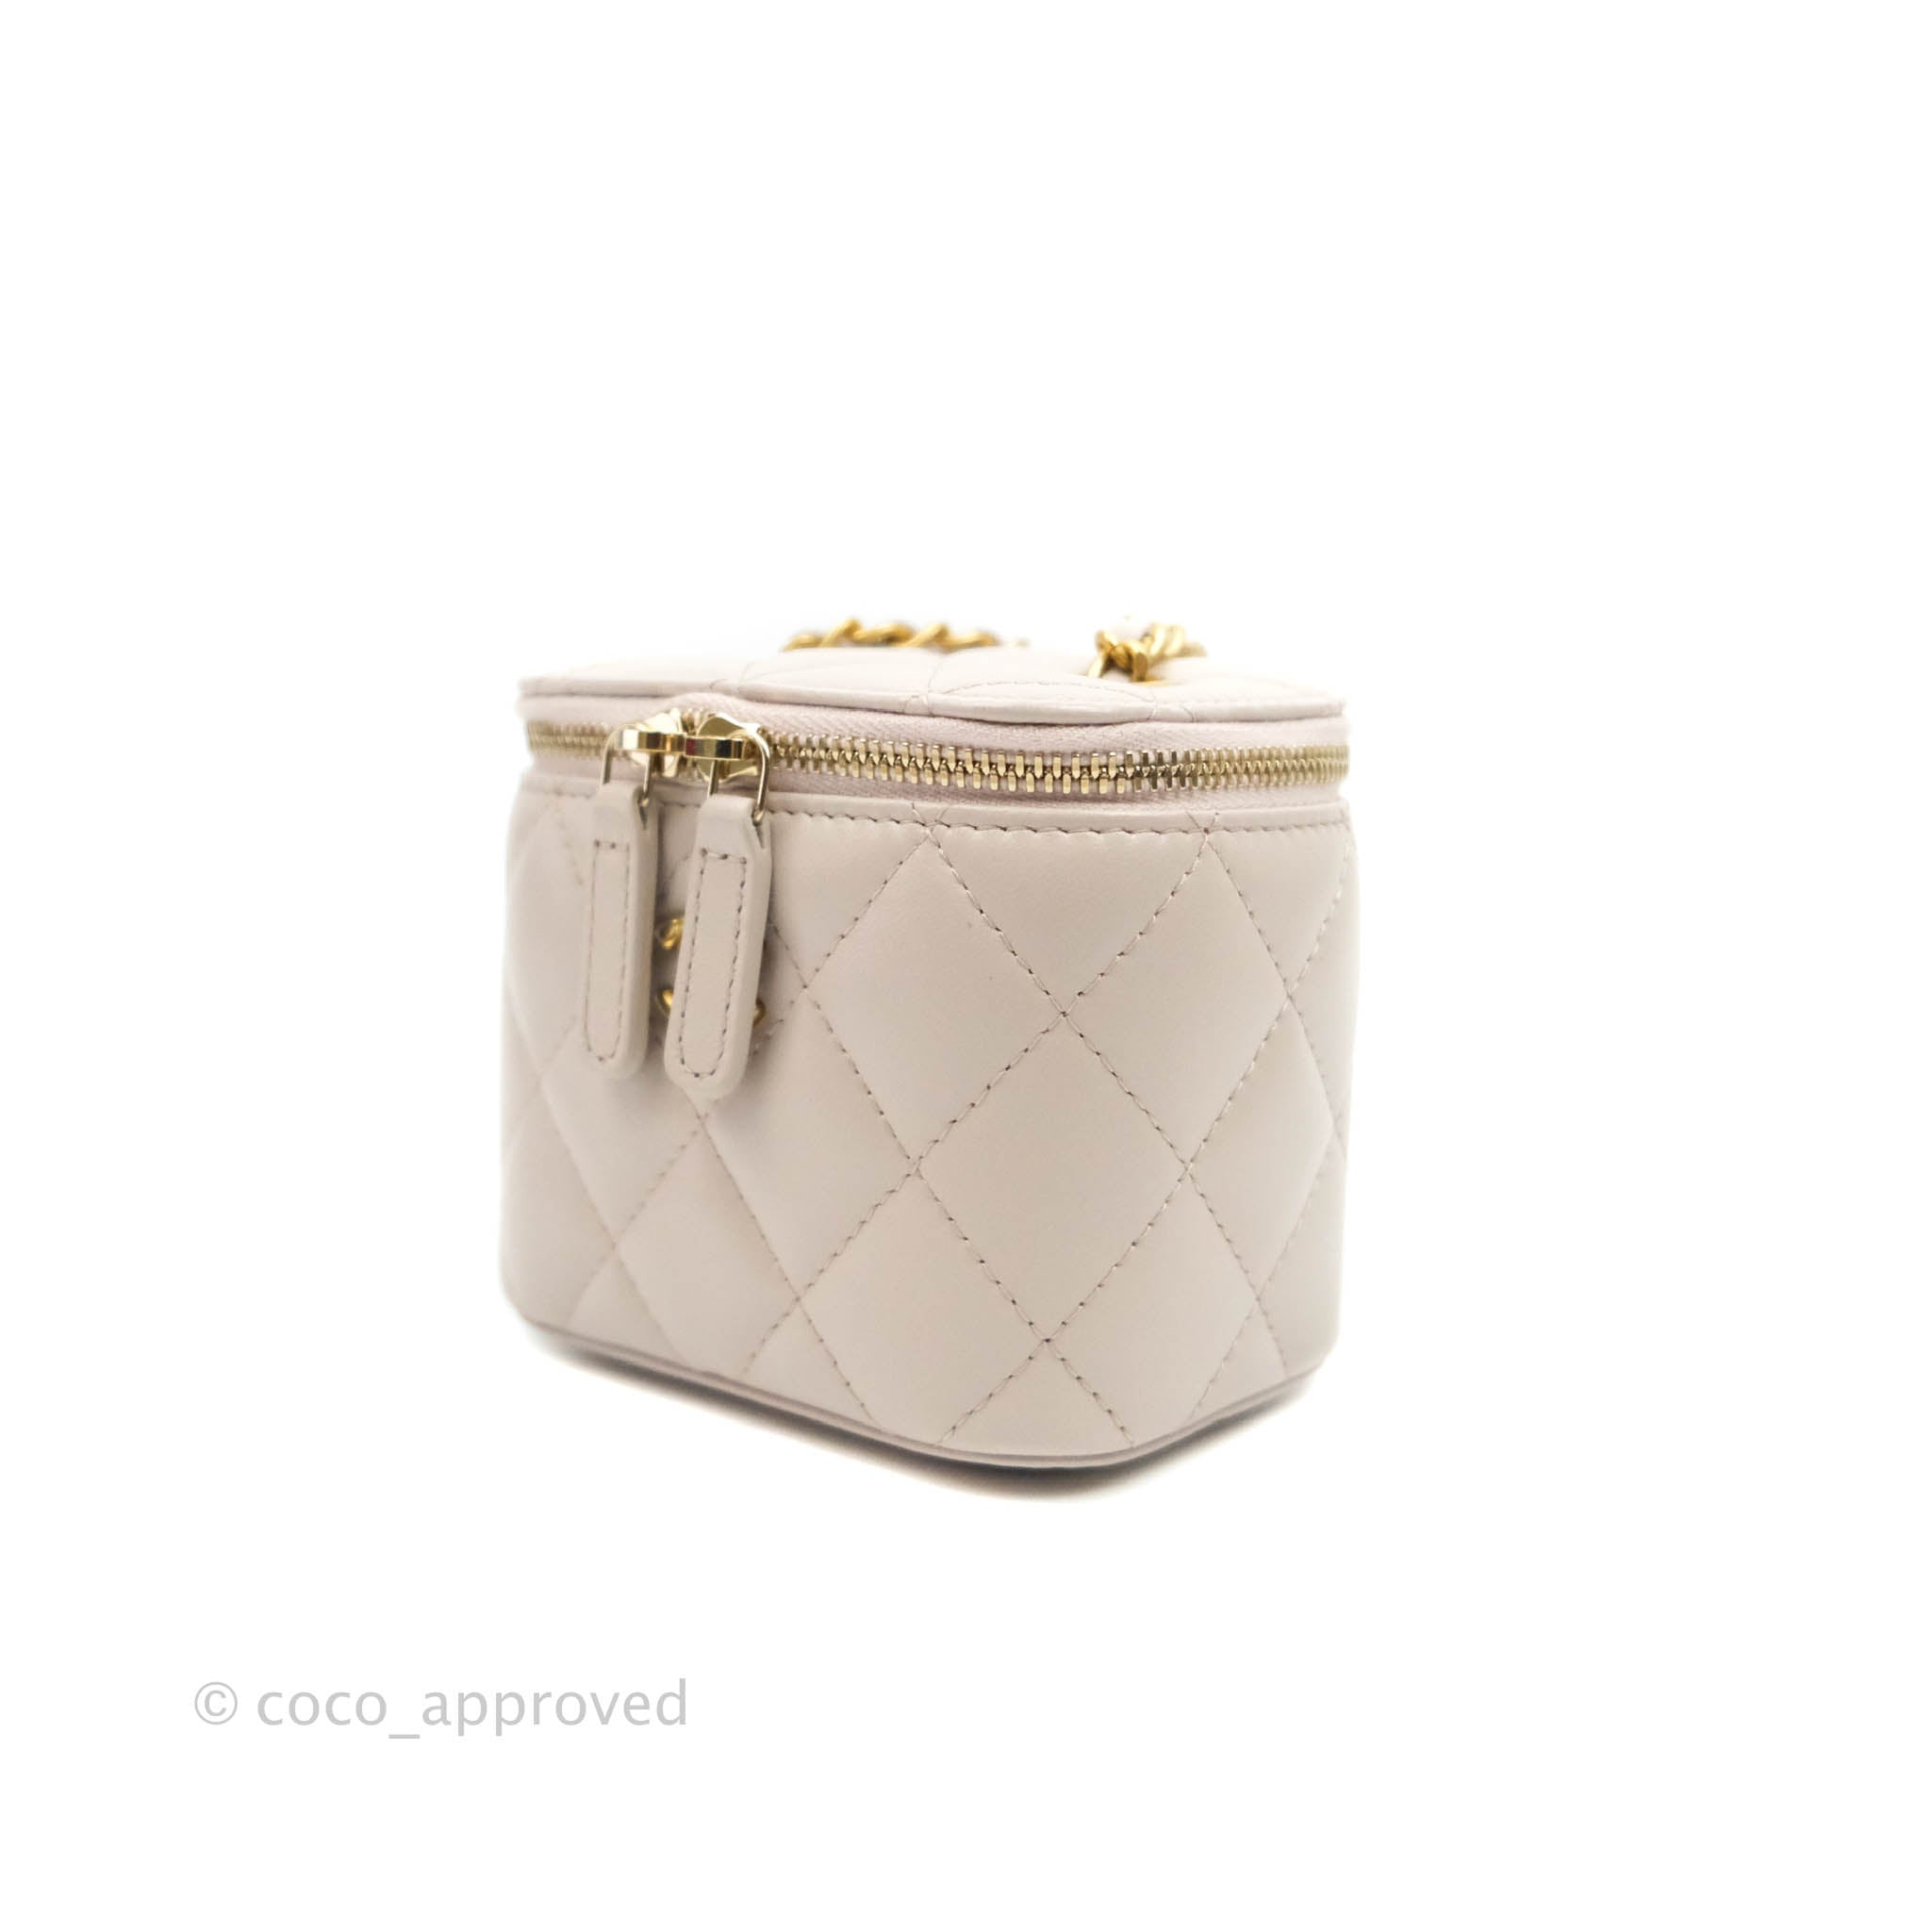 CHANEL Lambskin Quilted CC Pearl Crush Camera Case Beige | FASHIONPHILE